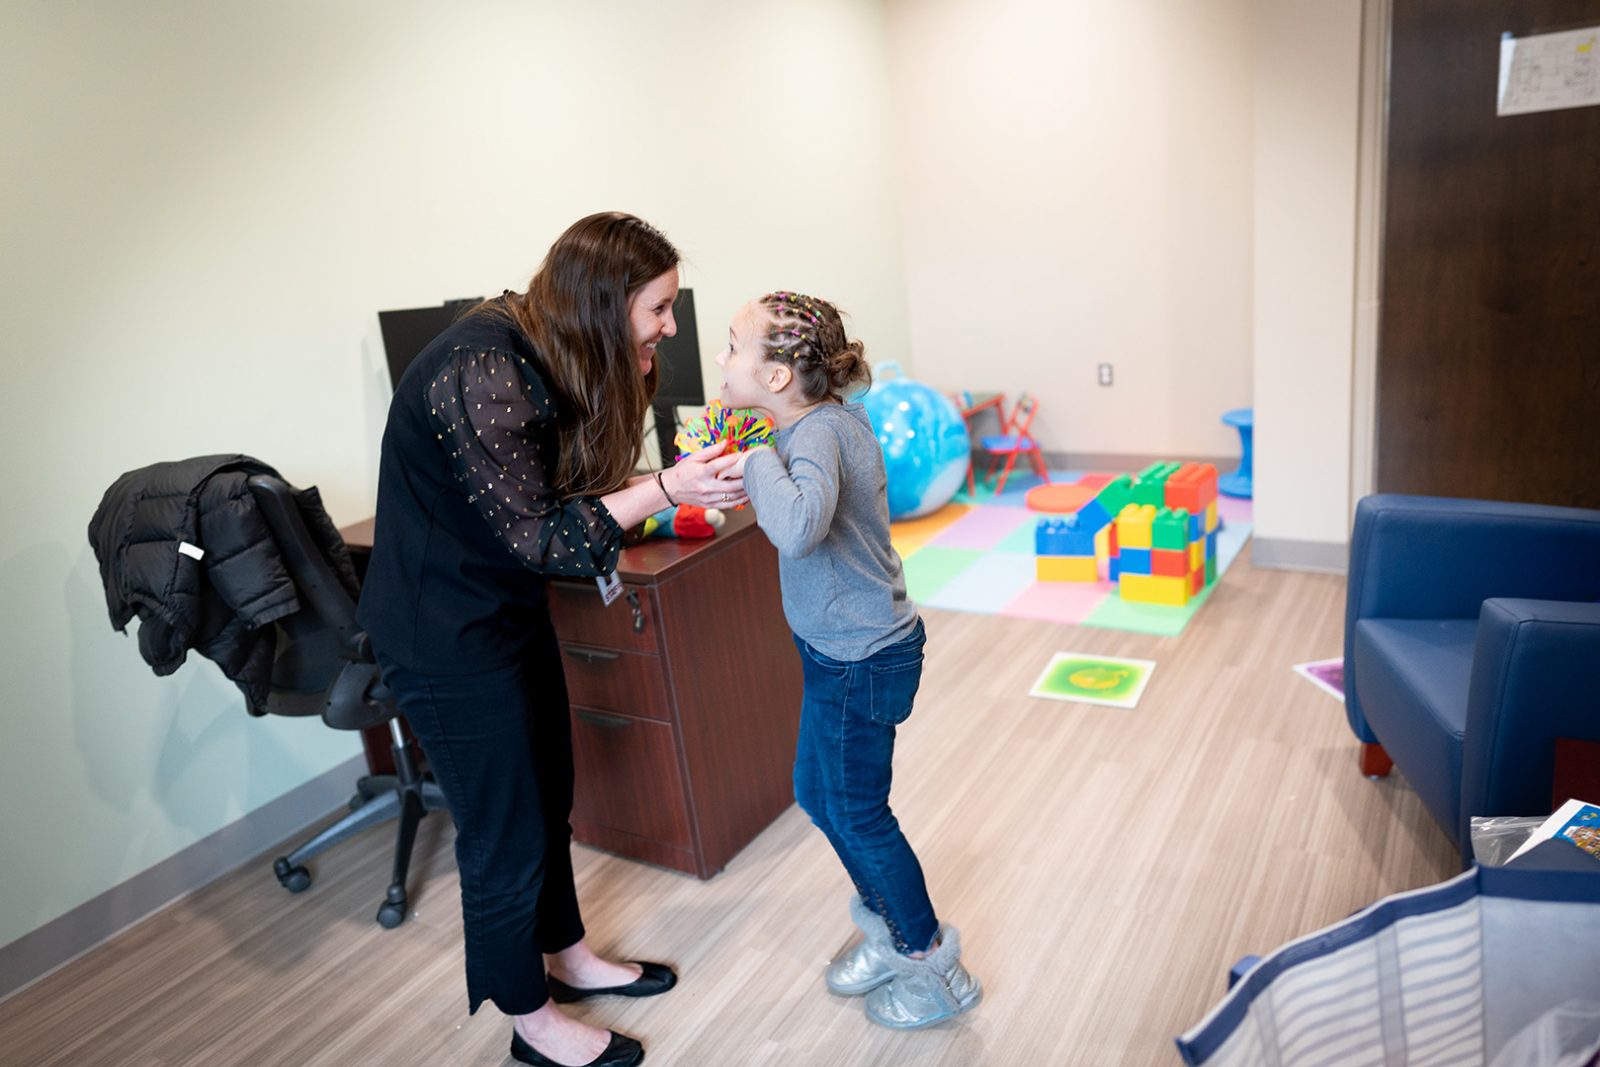 An autism assessment specialist leans in to hold the hands of an excited girl during structured play in an autism assessment test.